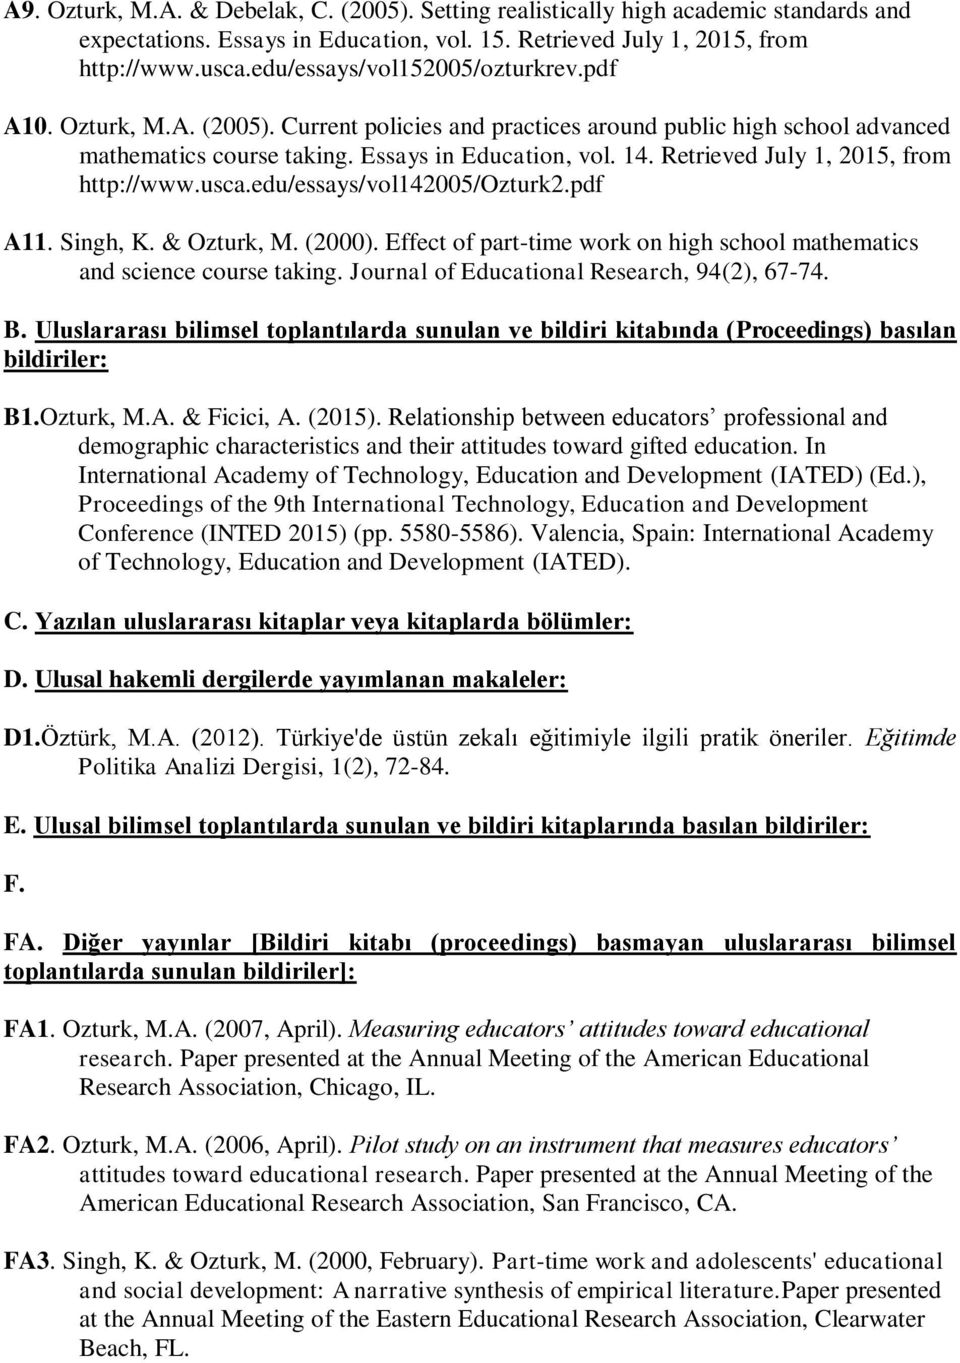 Retrieved July 1, 2015, from http://www.usca.edu/essays/vol142005/ozturk2.pdf A11. Singh, K. & Ozturk, M. (2000). Effect of part-time work on high school mathematics and science course taking.